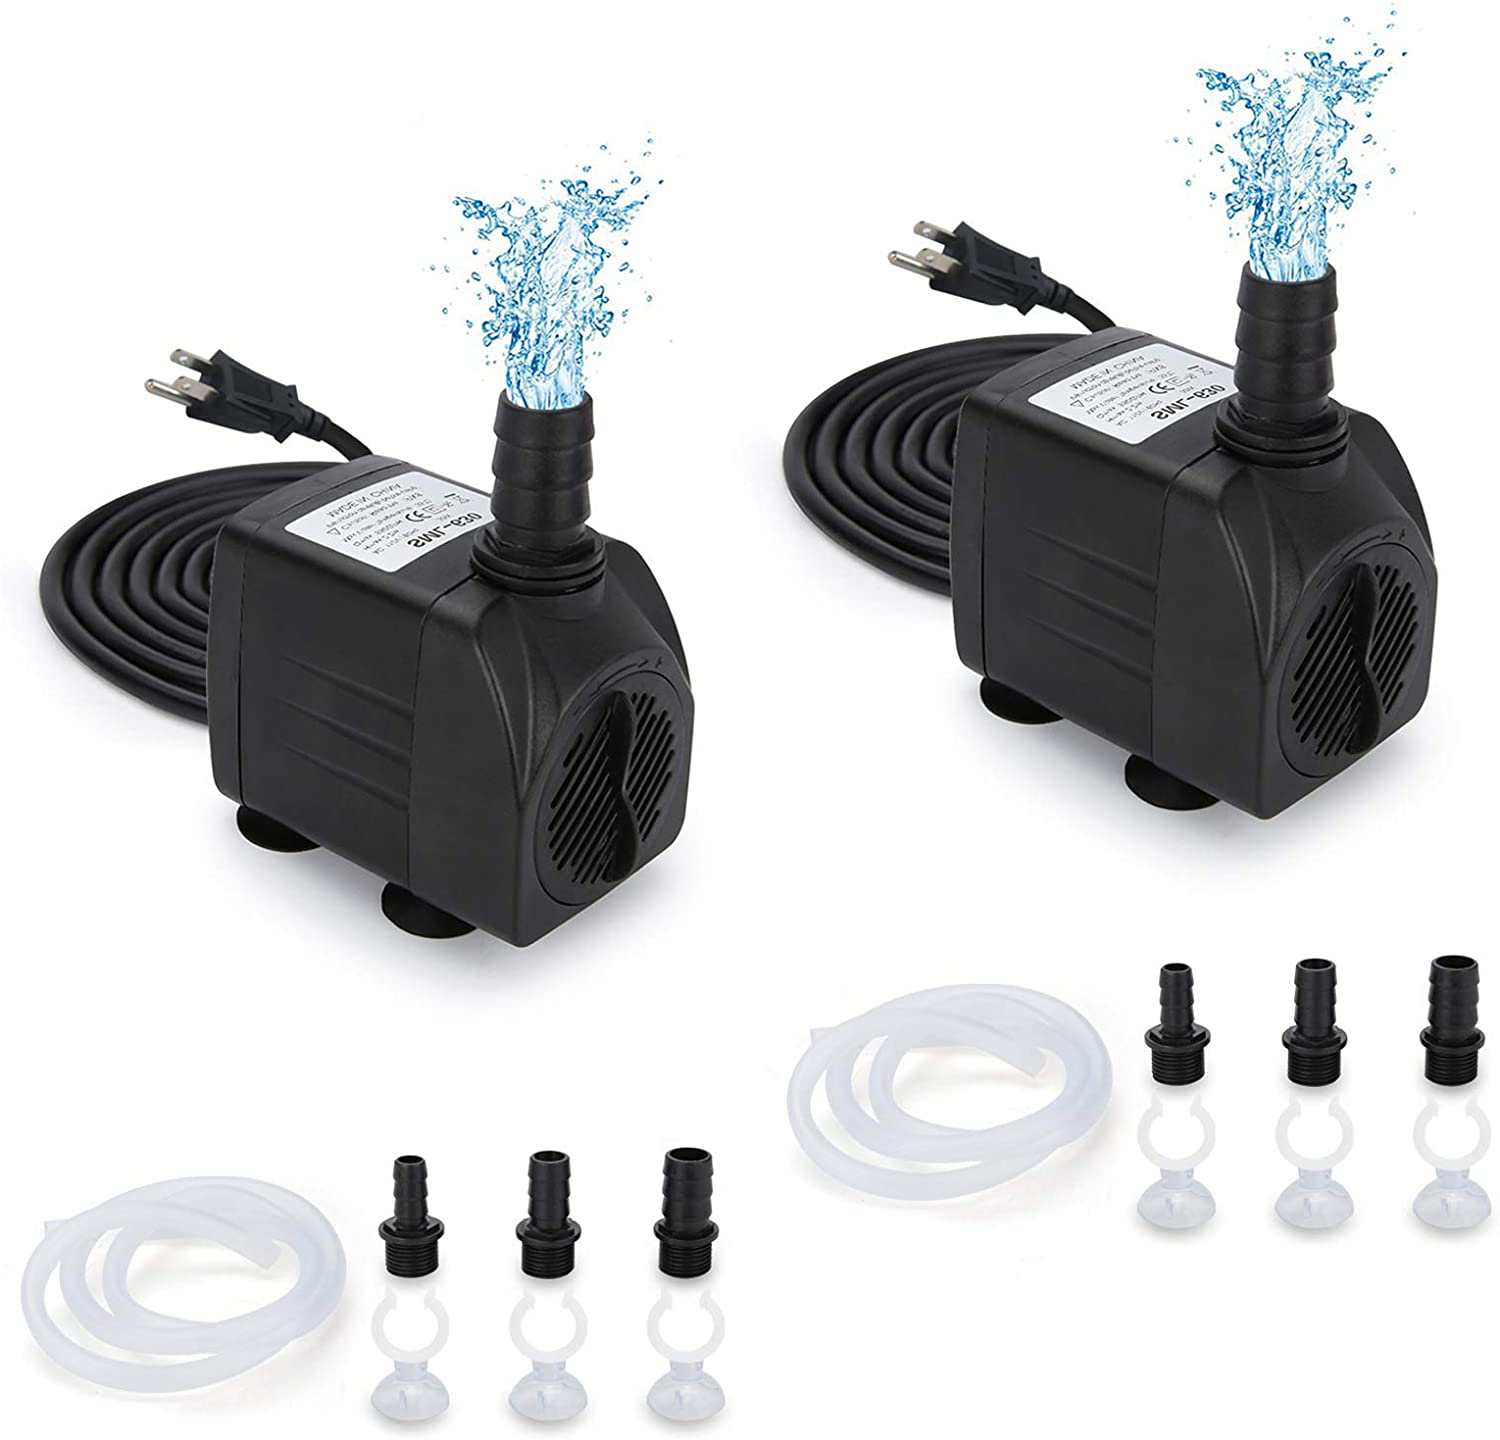 GROWNEER 550GPH Submersible Pump 30W Ultra Quiet Fountain Water Pump, 2000L/H, with 7.2Ft High Lift, 3 Nozzles, 4.9 Feet Tubing for Aquarium, Fish Tank, Pond, Hydroponics, Statuary Animals & Pet Supplies > Pet Supplies > Fish Supplies > Aquarium & Pond Tubing GROWNEER 2 550 GPH 